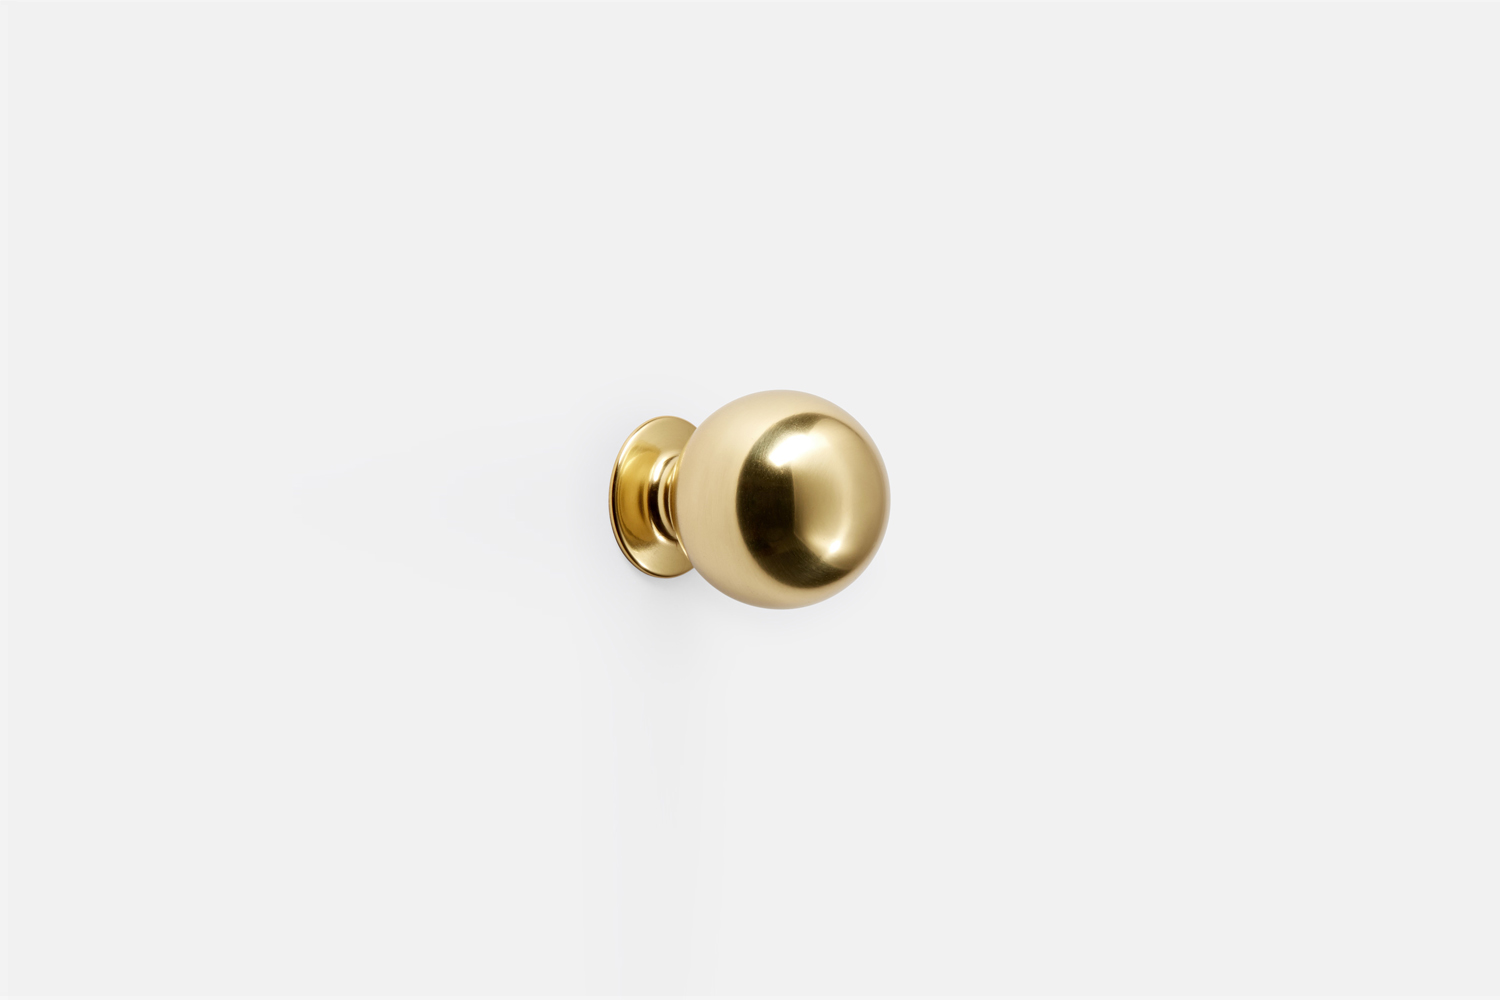 the ball cabinet knob, available in aged or unlacquered brass, is $19 at reju 9